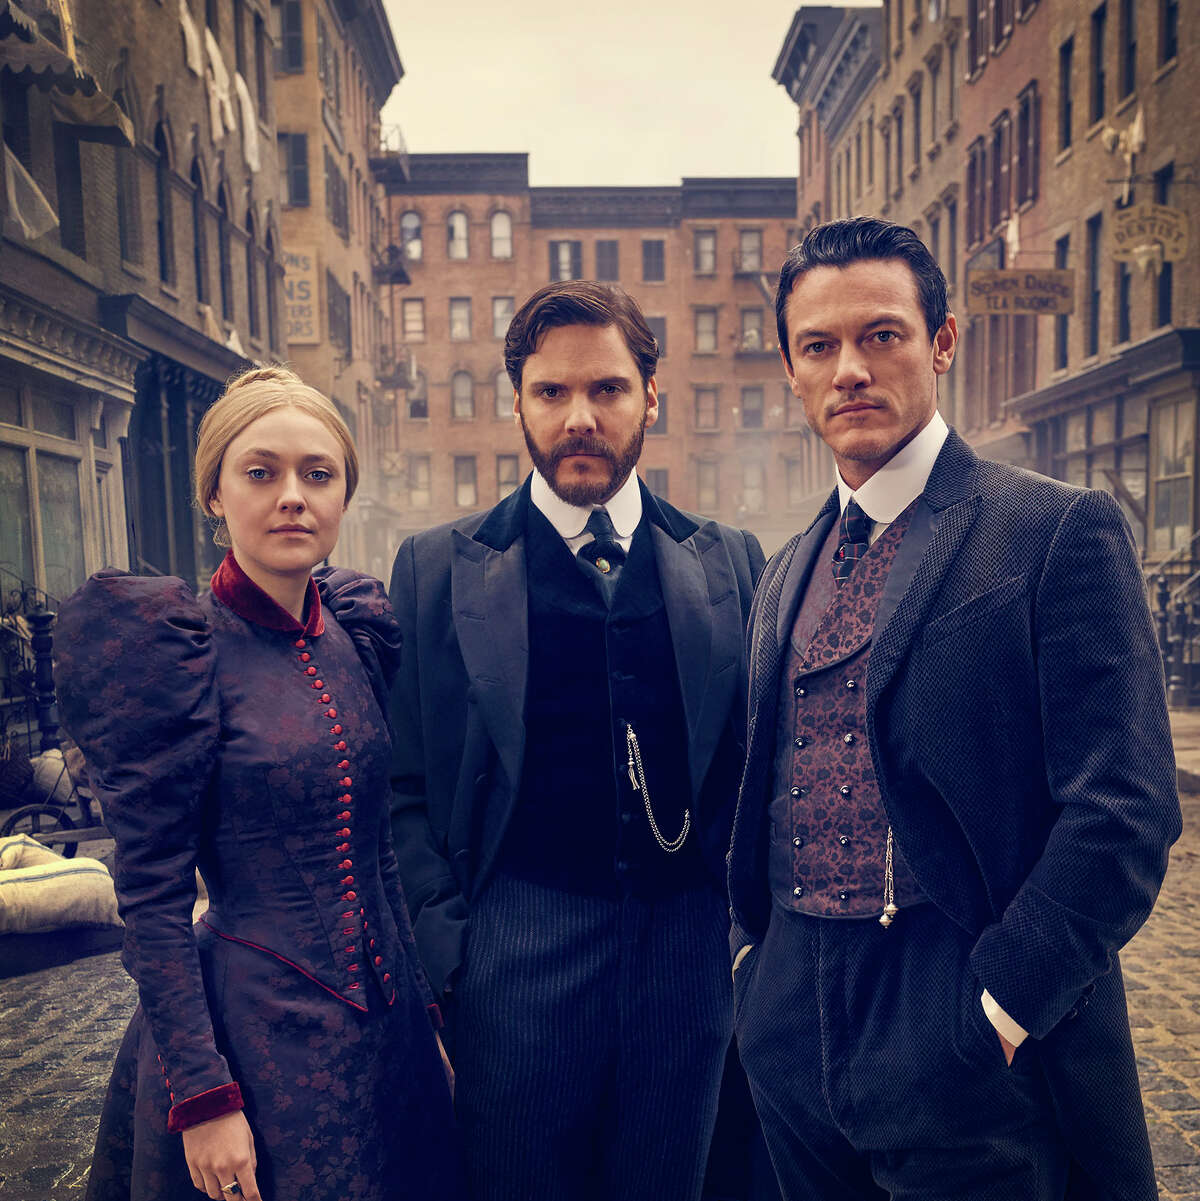 "The Alienist" takes viewers back to 19th-century New York and stars Dakota Fanning, from left, Daniel Brühl and Luke Evans as unlikely gumshoes determined to track down a diabolical killer of young boy prostitutes.